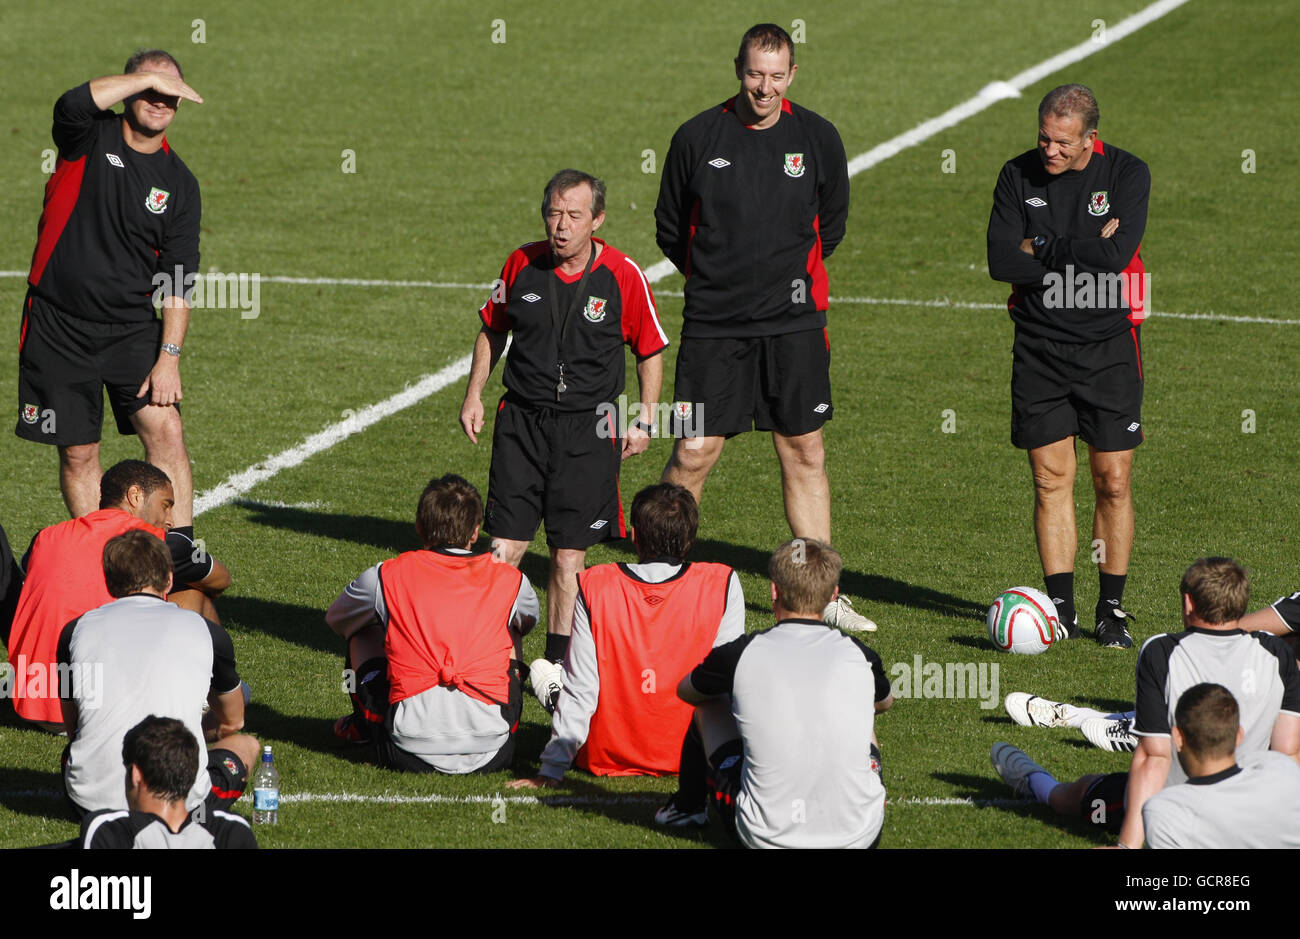 Soccer - UEFA Euro 2012 - Qualifying - Group G - Wales v Bulgaria - Wales Training Session - Vale of Glamorgan Hotel. Wales caretaker manager Brian Flynn talks to player as he holds his 1st training session at the Vale of Glamorgan Hotel, Cardiff, Wales. Stock Photo